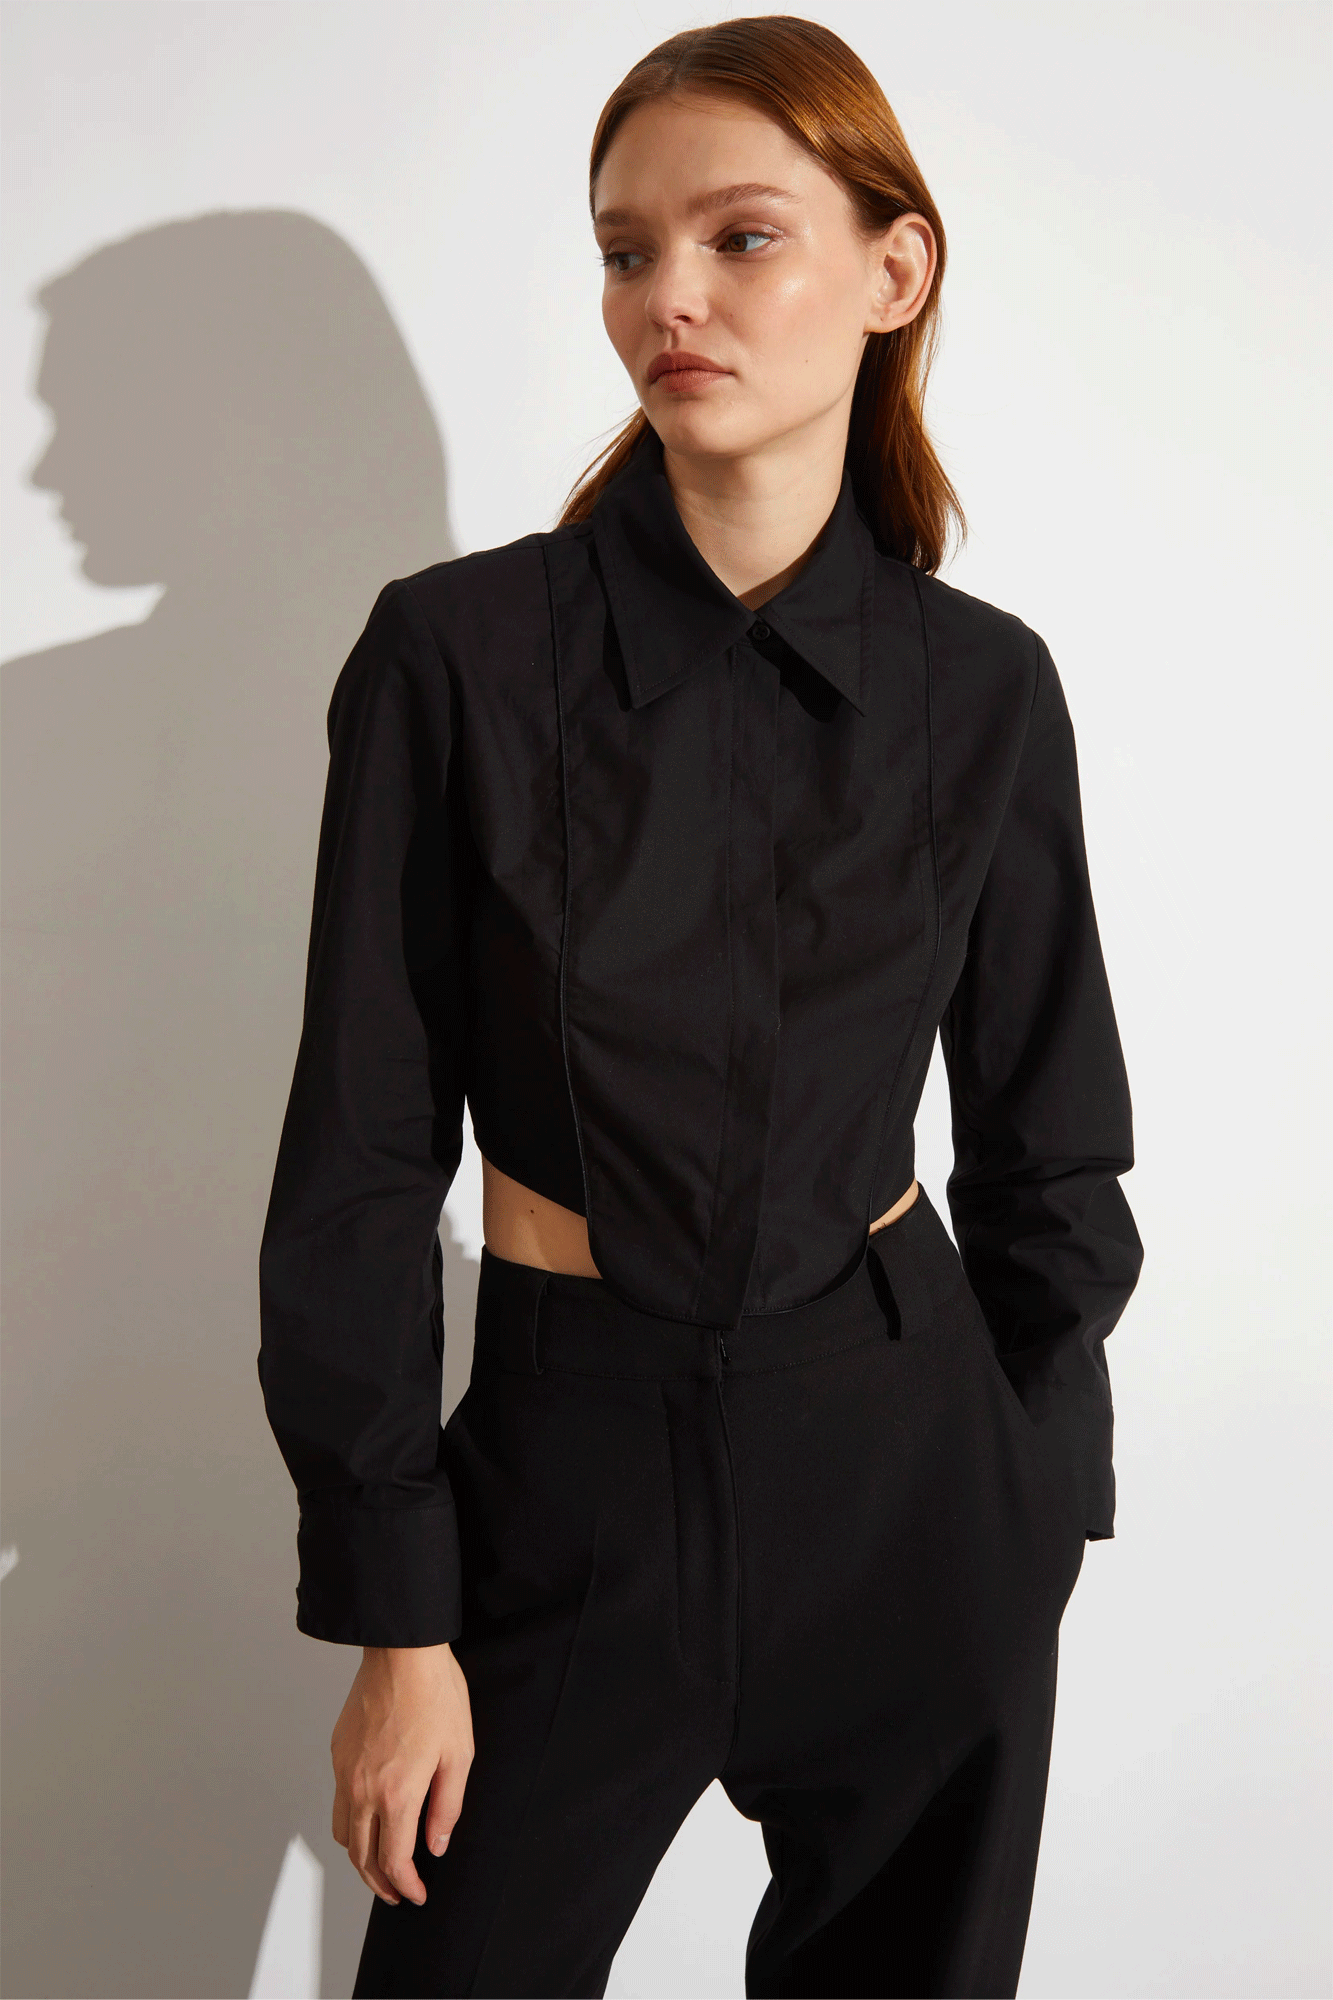 The Joyce Tuxedo Shirt from Saint Art is a stylishly menswear-inspired design with a flattering, feminine fit. Crafted from cropped poplin fabric, this shirt features black satin piping on the chest and a unique tuxedo bib detail. With a curved dipped hem, this luxe top will have heads turning.